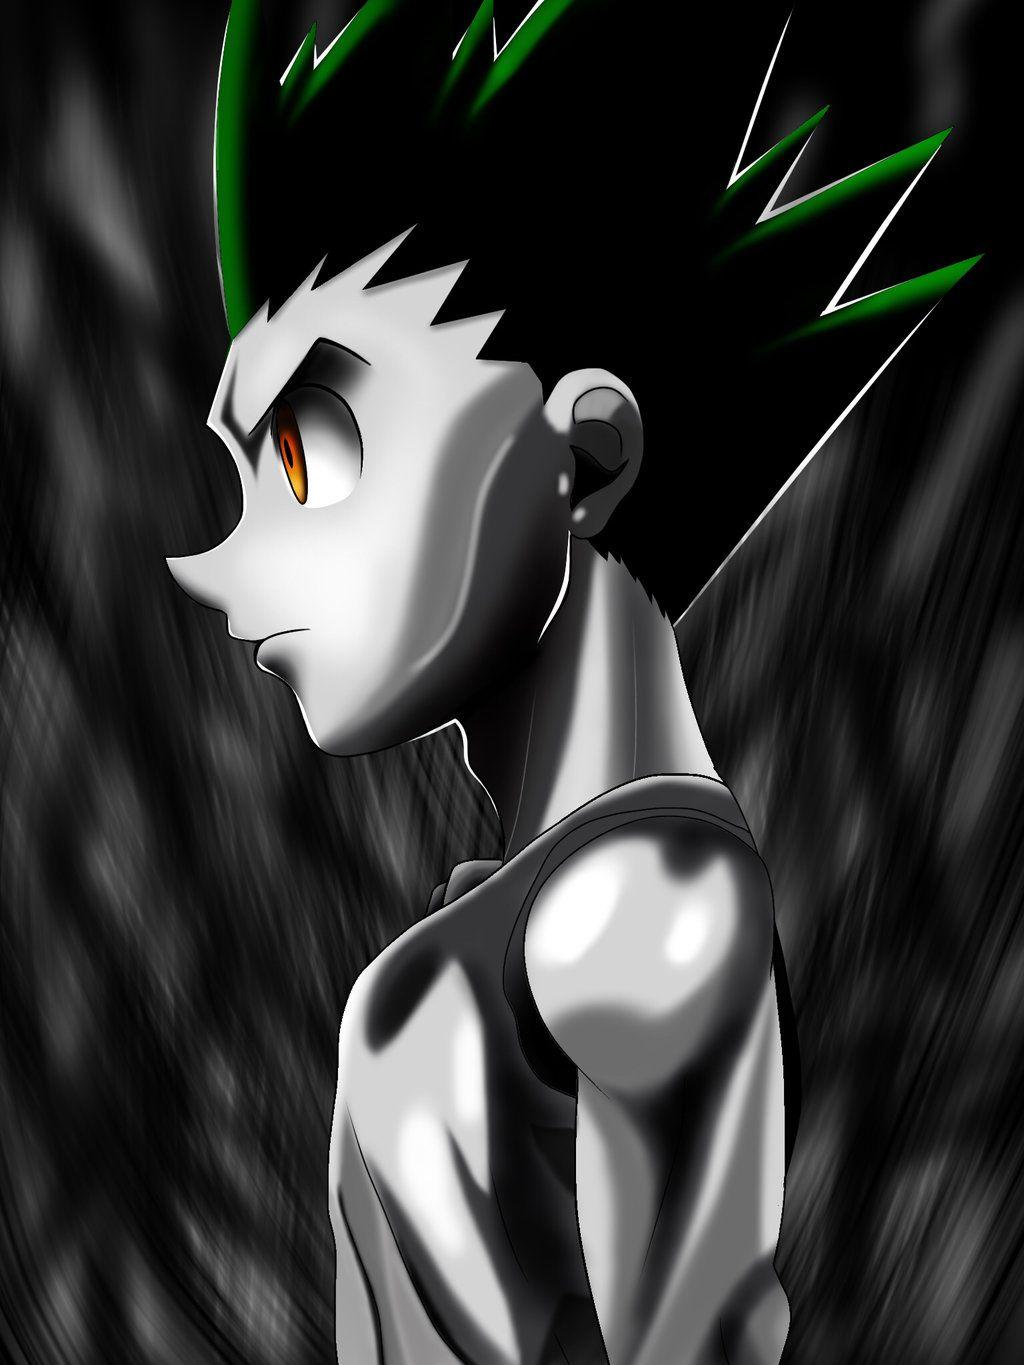 Gon Freecss done with iPad